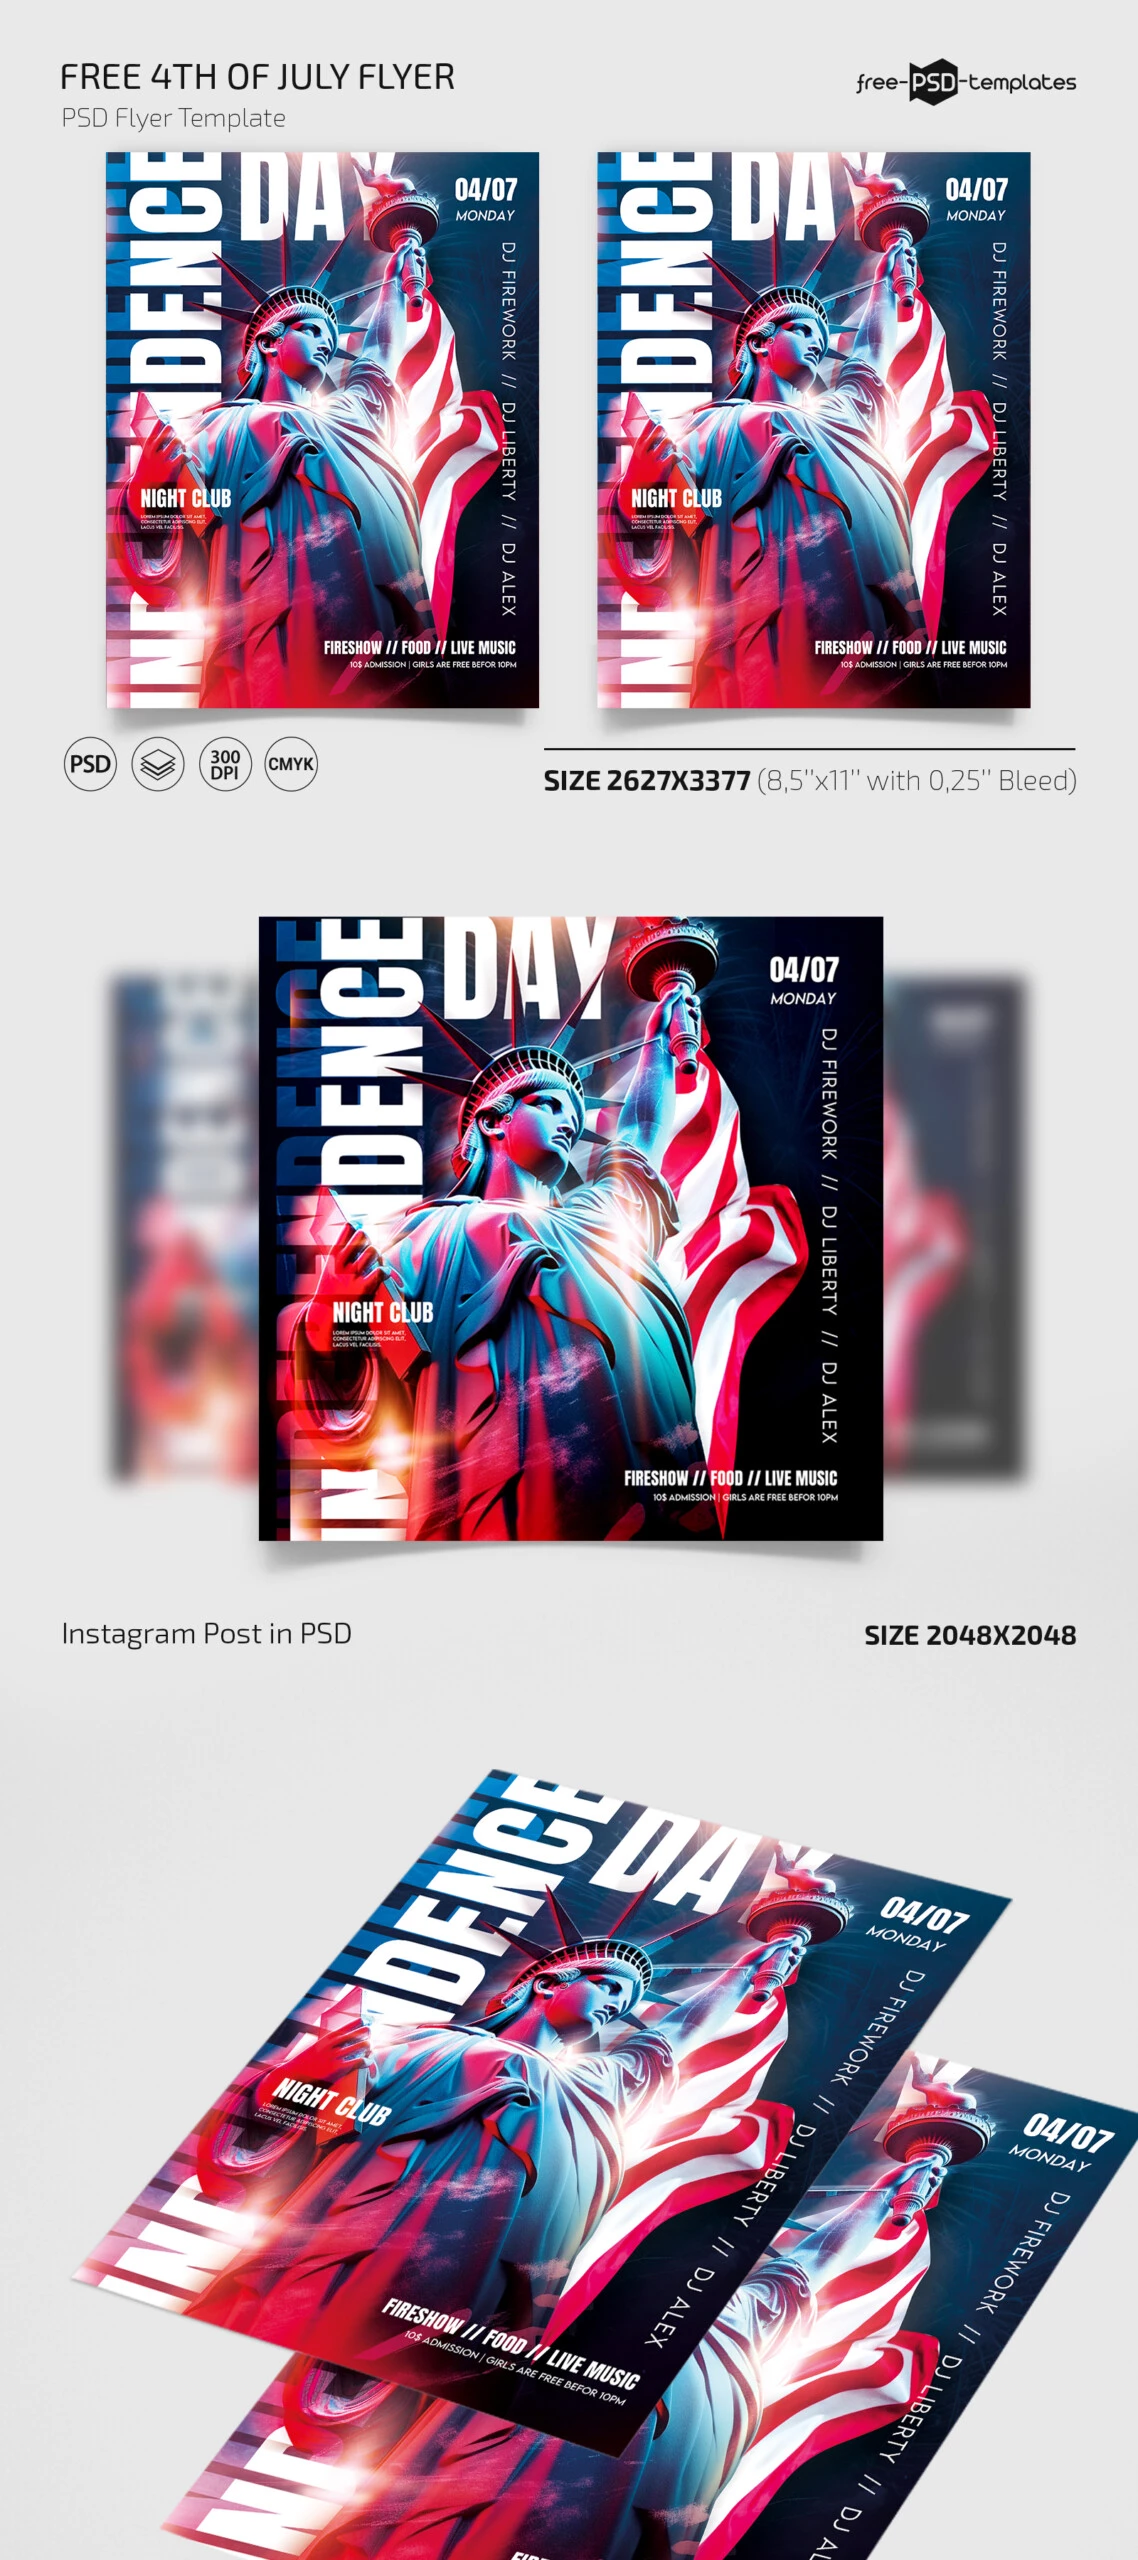 Free 4th of July Flyer